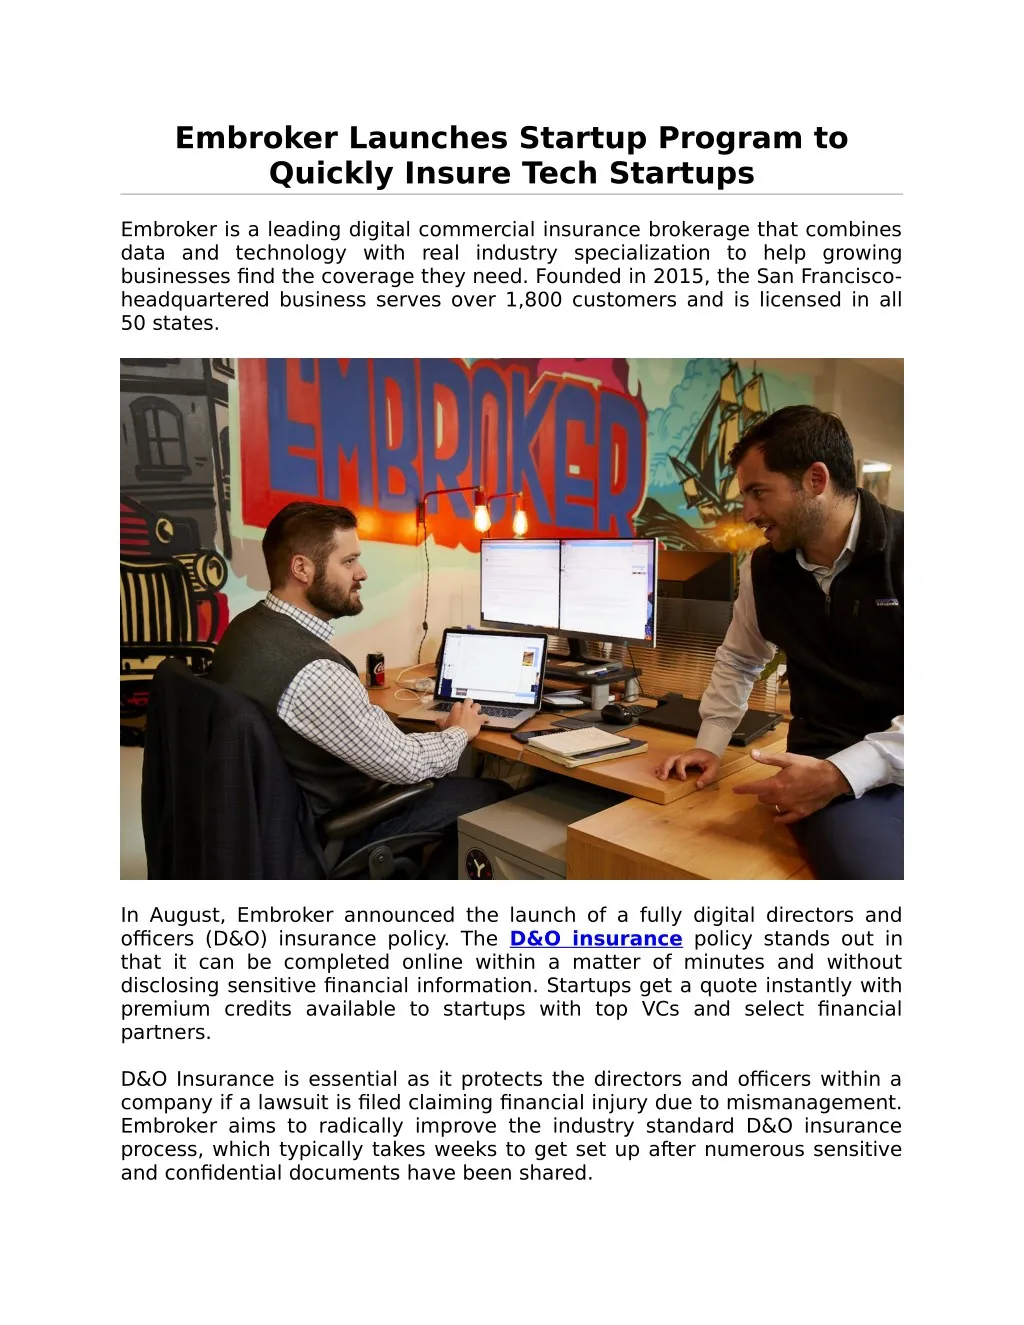 embroker launches startup program to quickly